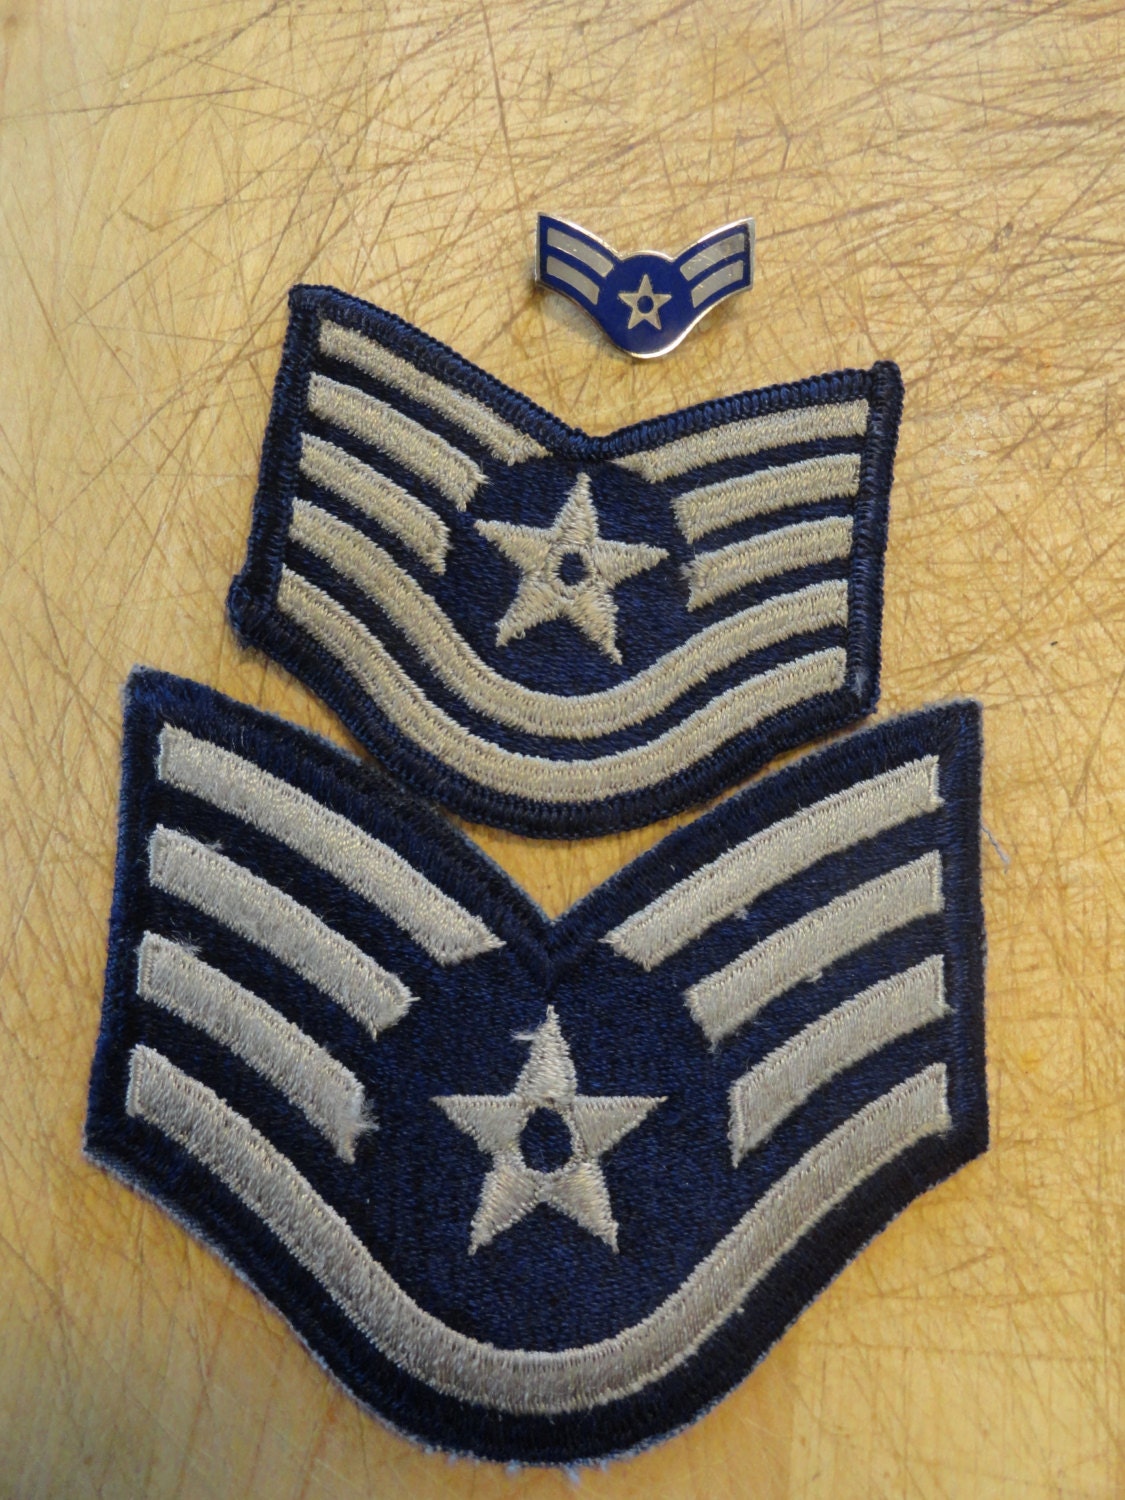 Vintage USAF Patch 1950s AIR FORCE Stripes Rank Patches Pin